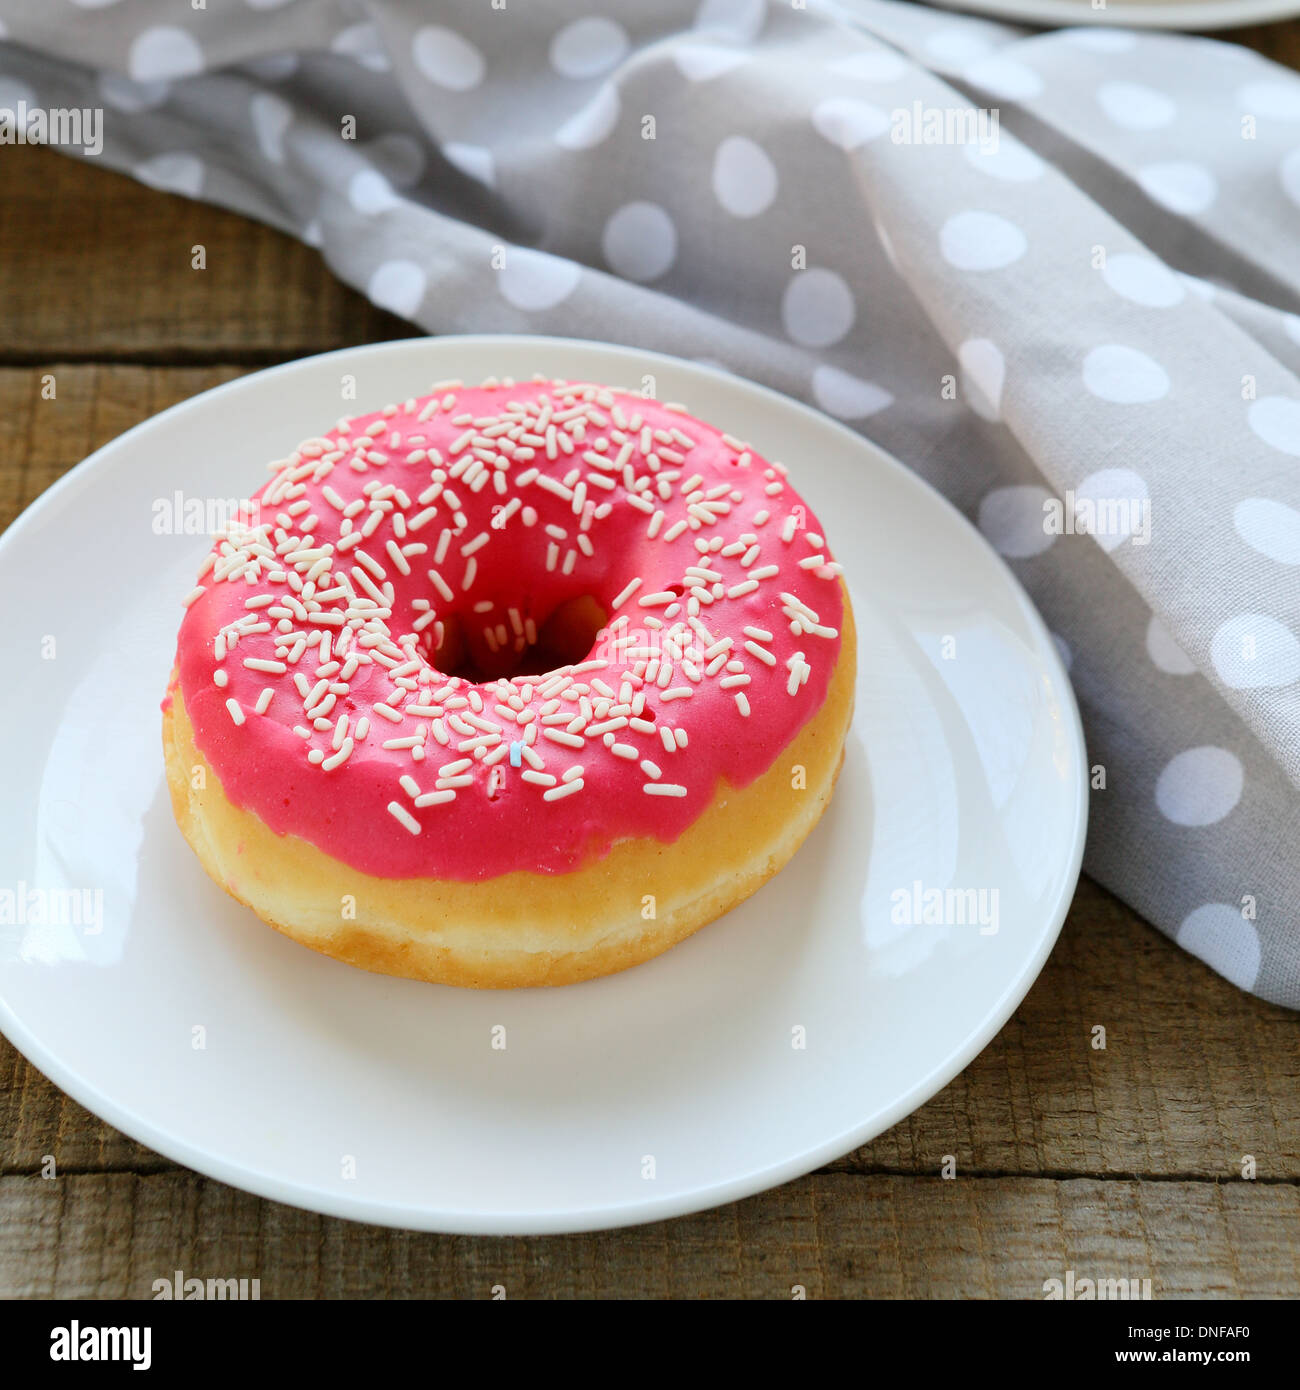 round donut with pink icing, food closeup Stock Photo